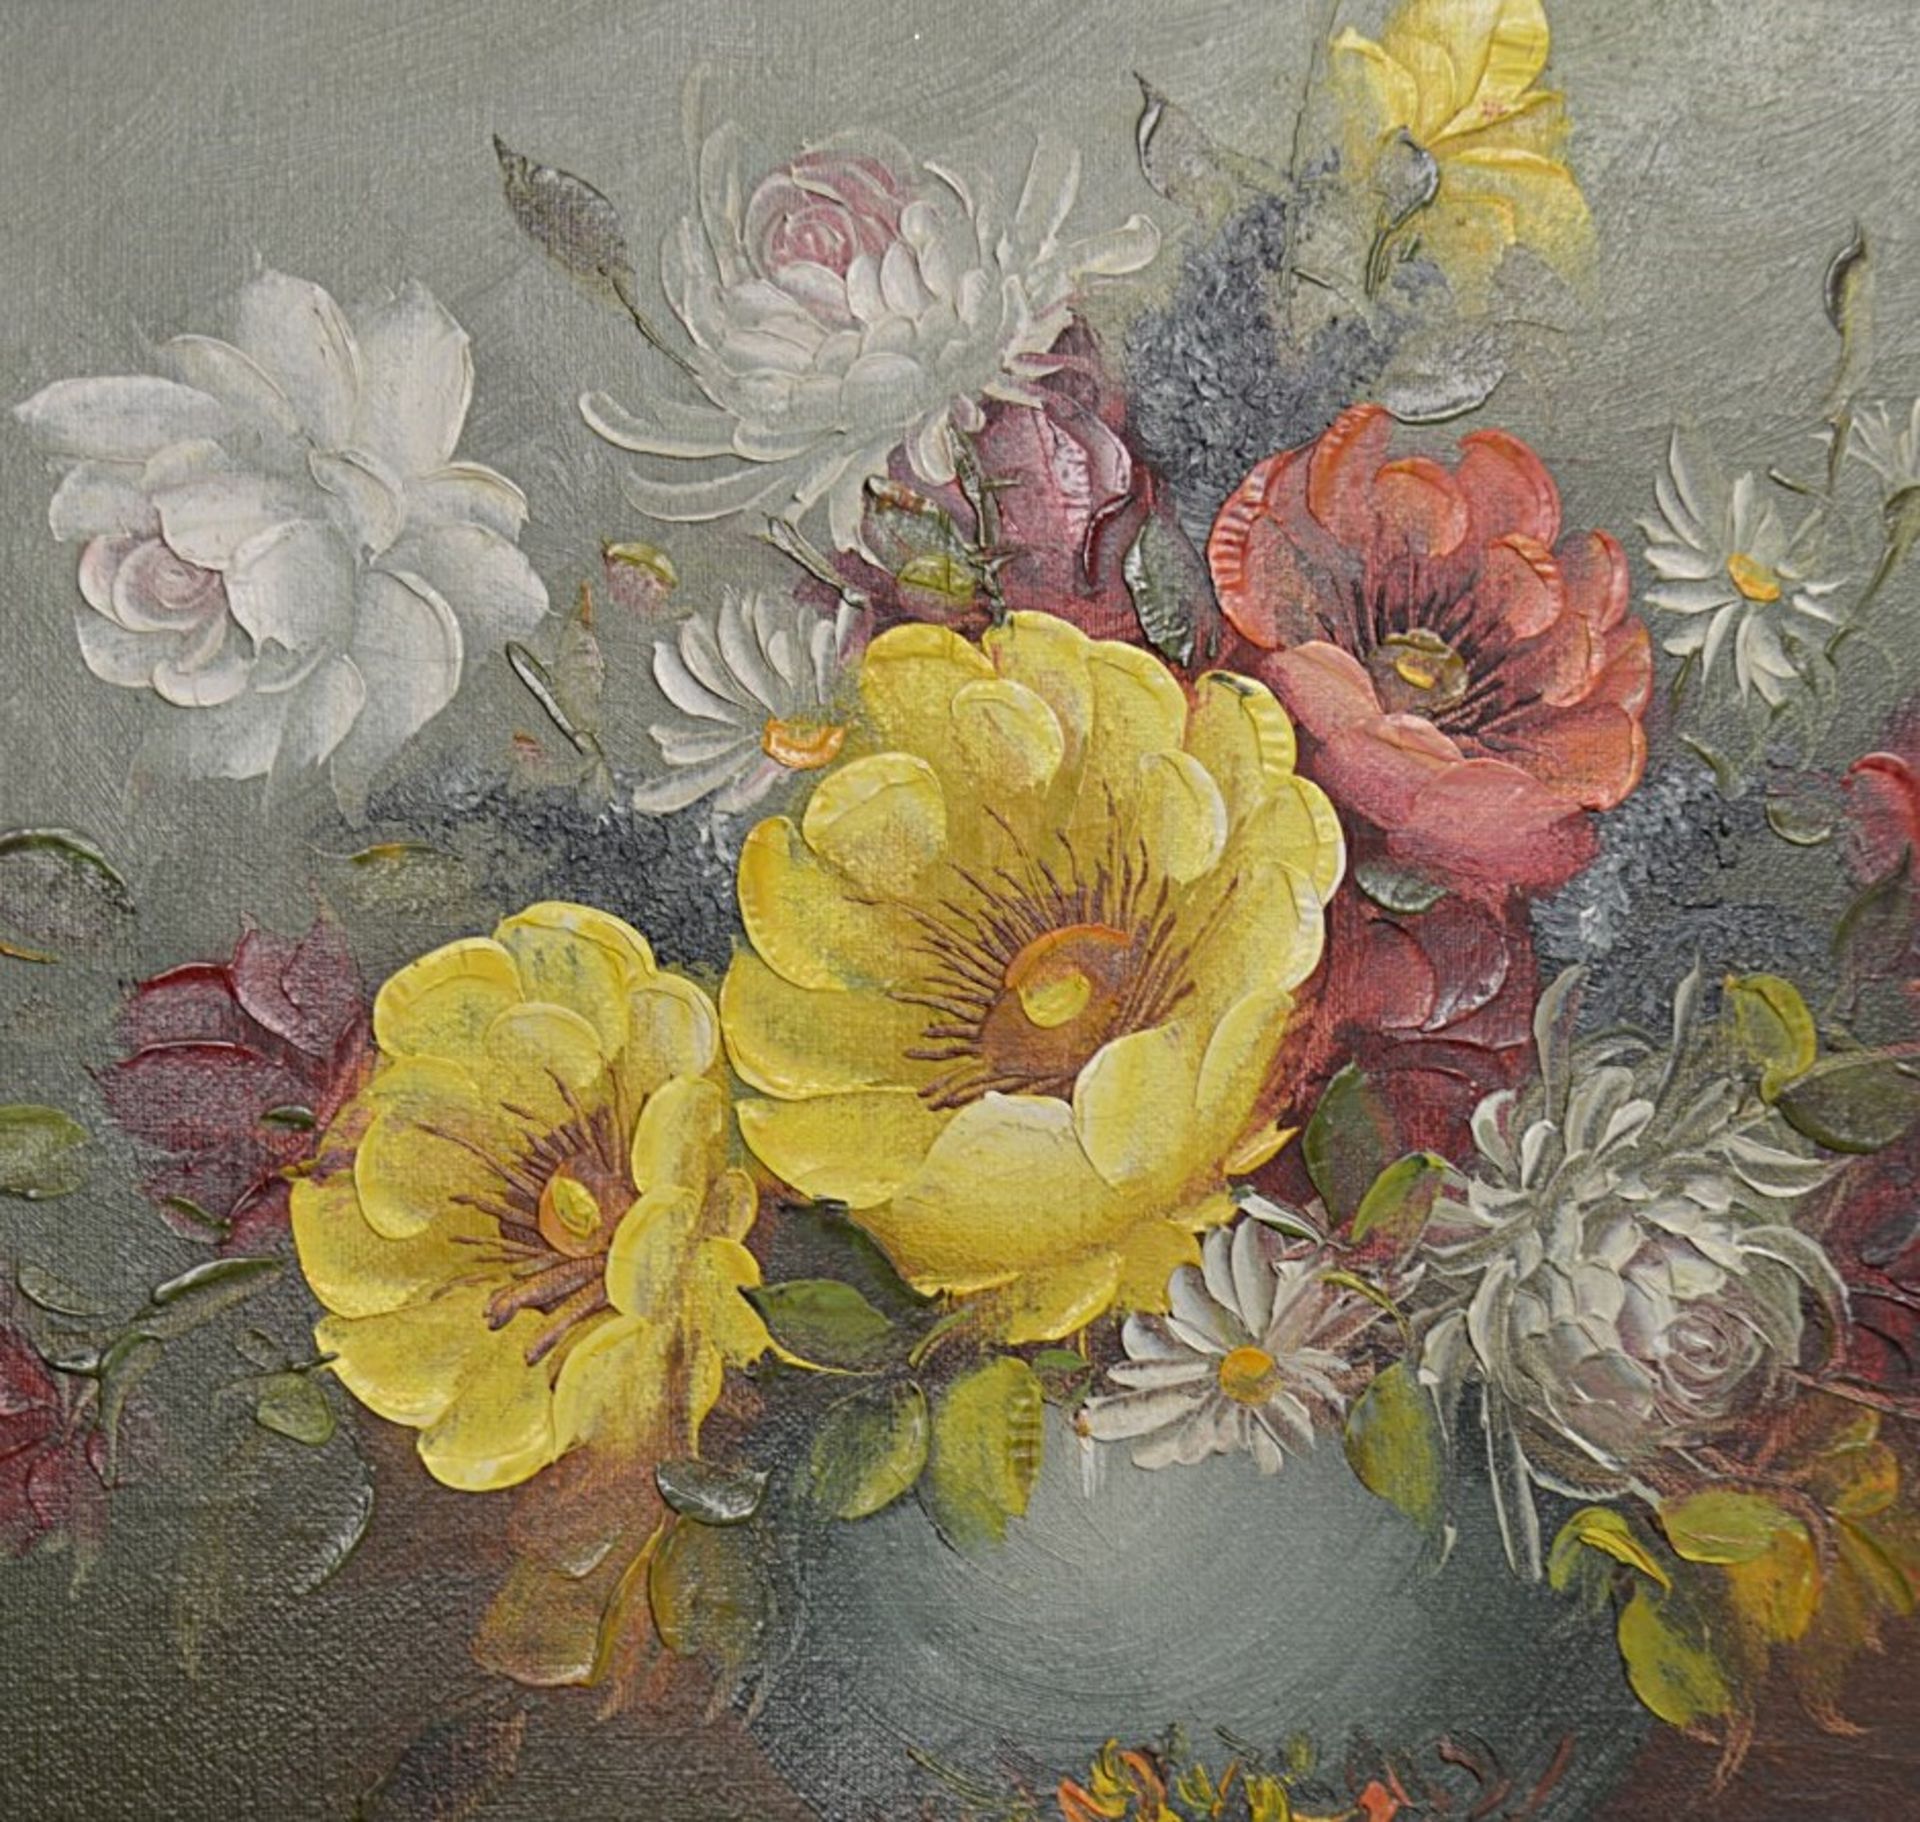 1 x Original Oil Painting Of Flowers On Canvas - Signed By The Artist - Dimensions: 36 x 46cm - Ref: - Image 2 of 6